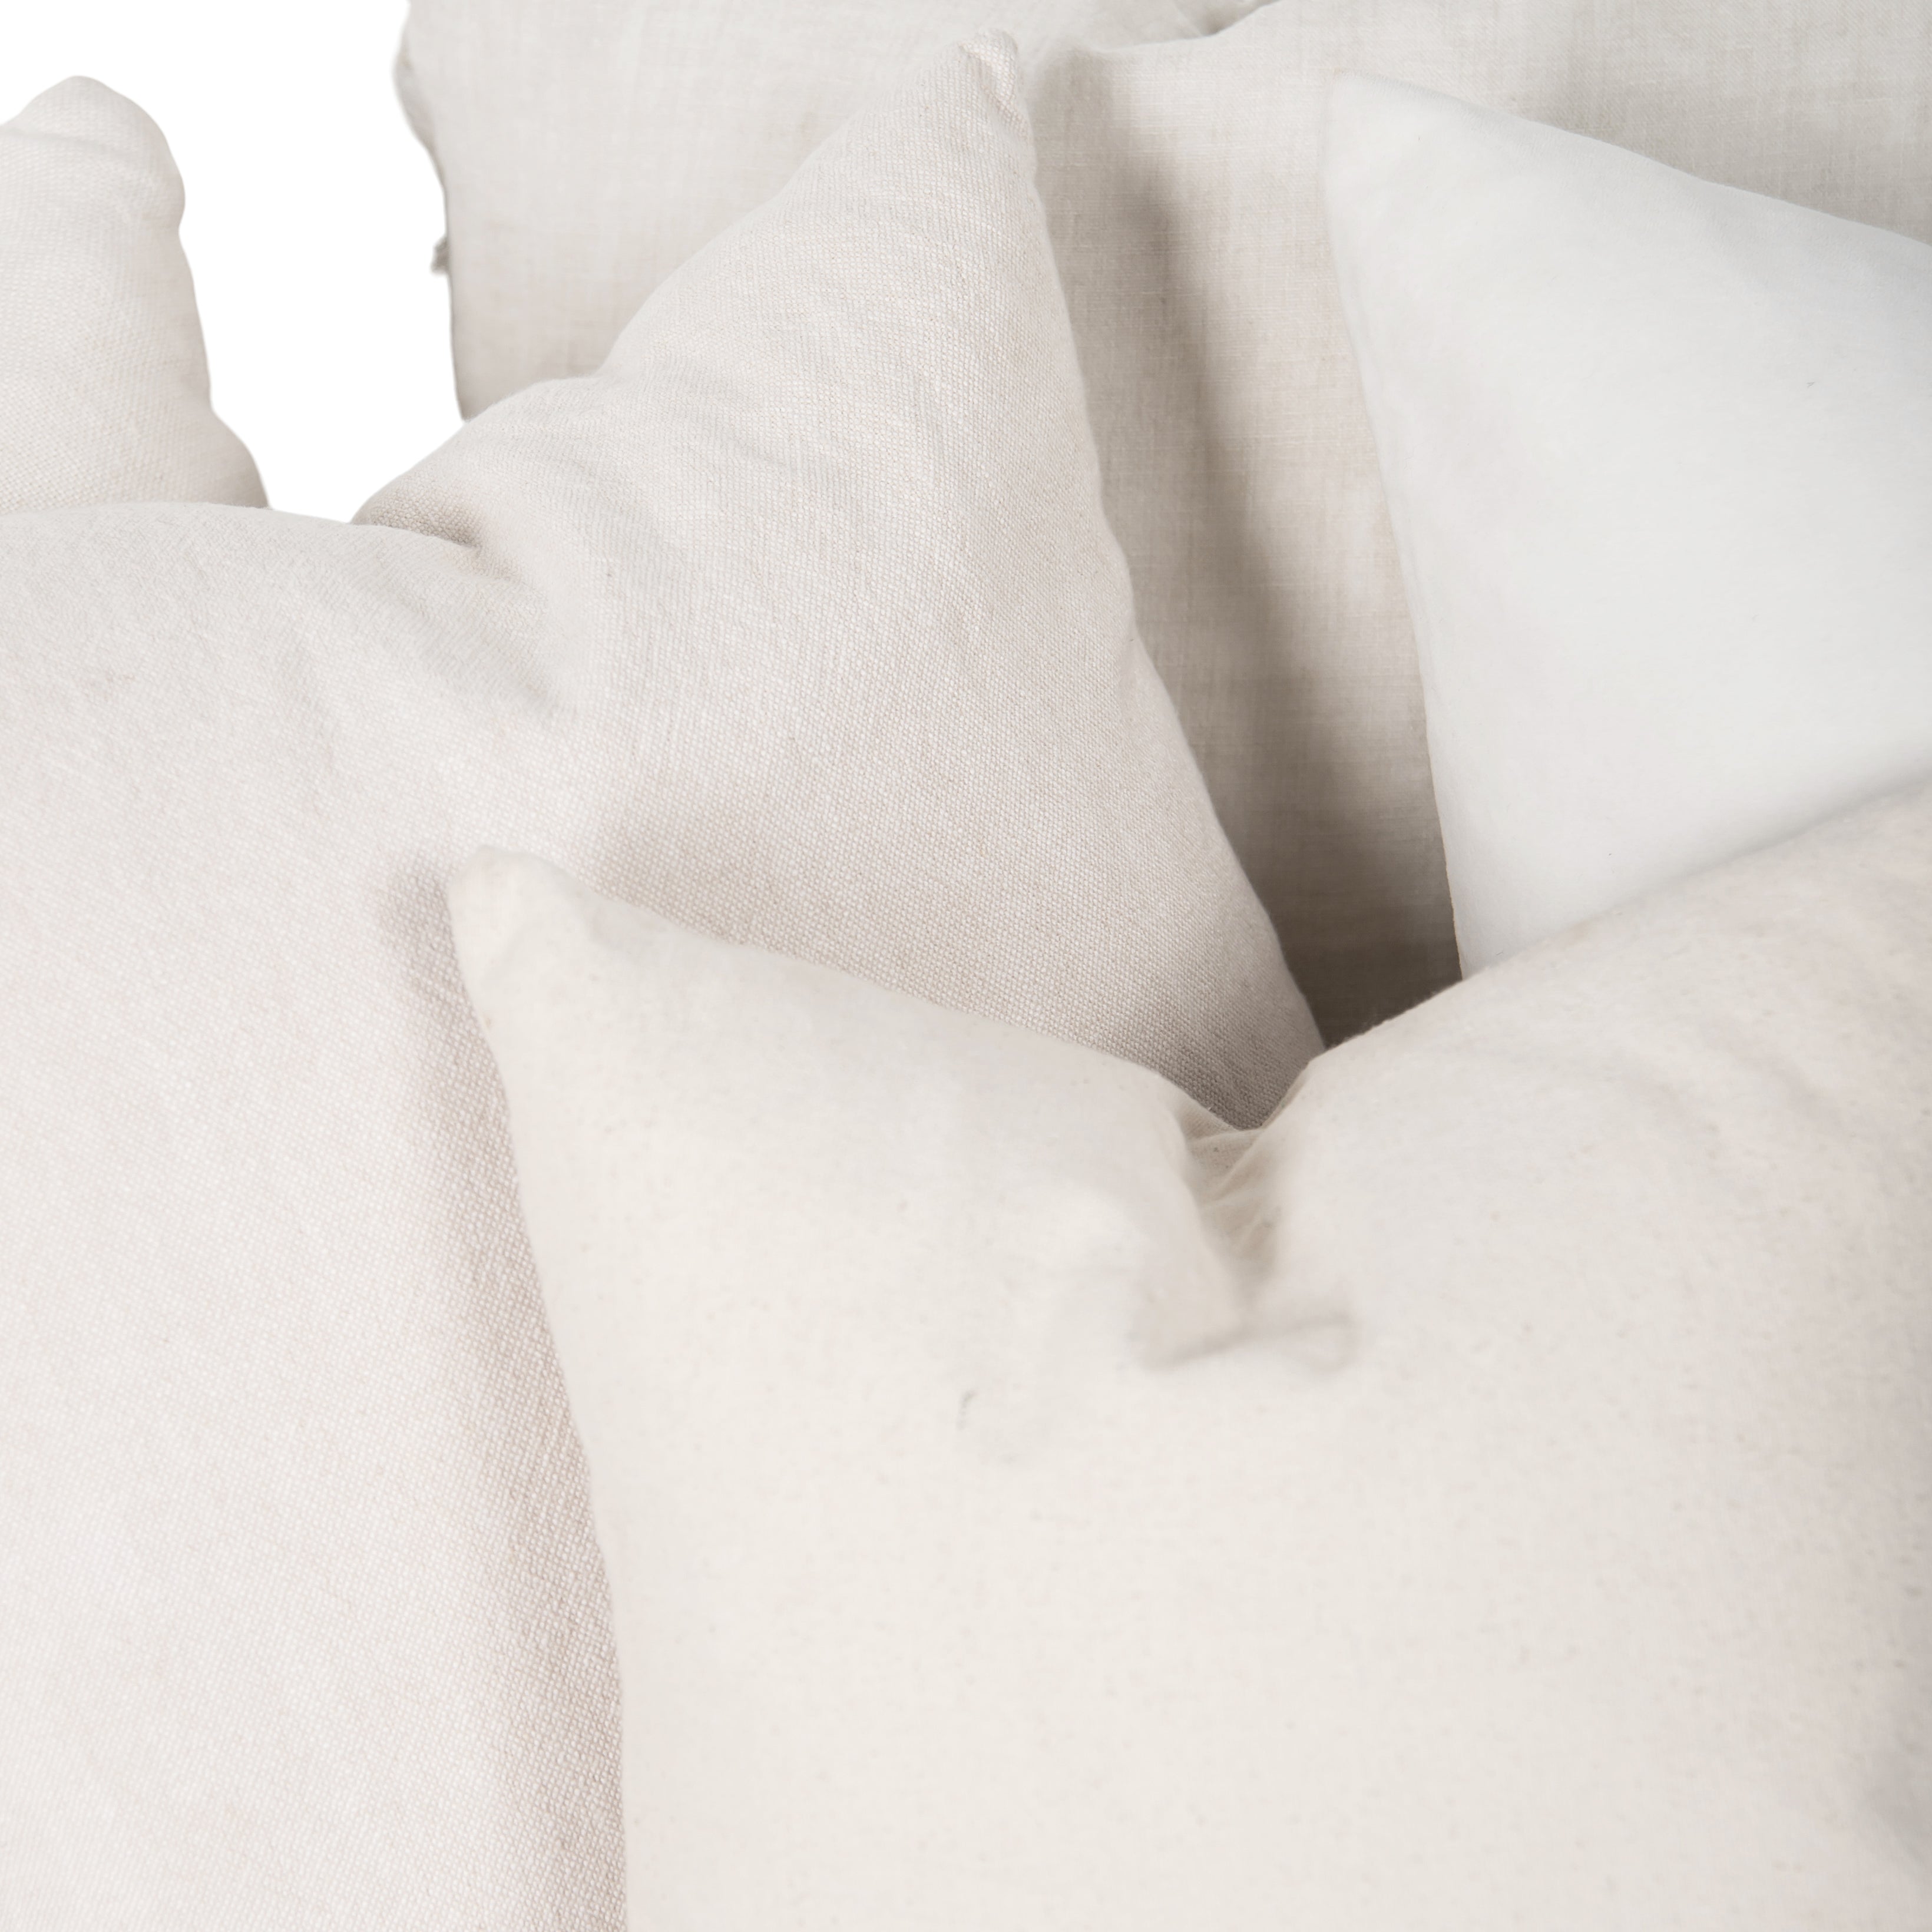 Classic Neutral Pillows (set of 3)